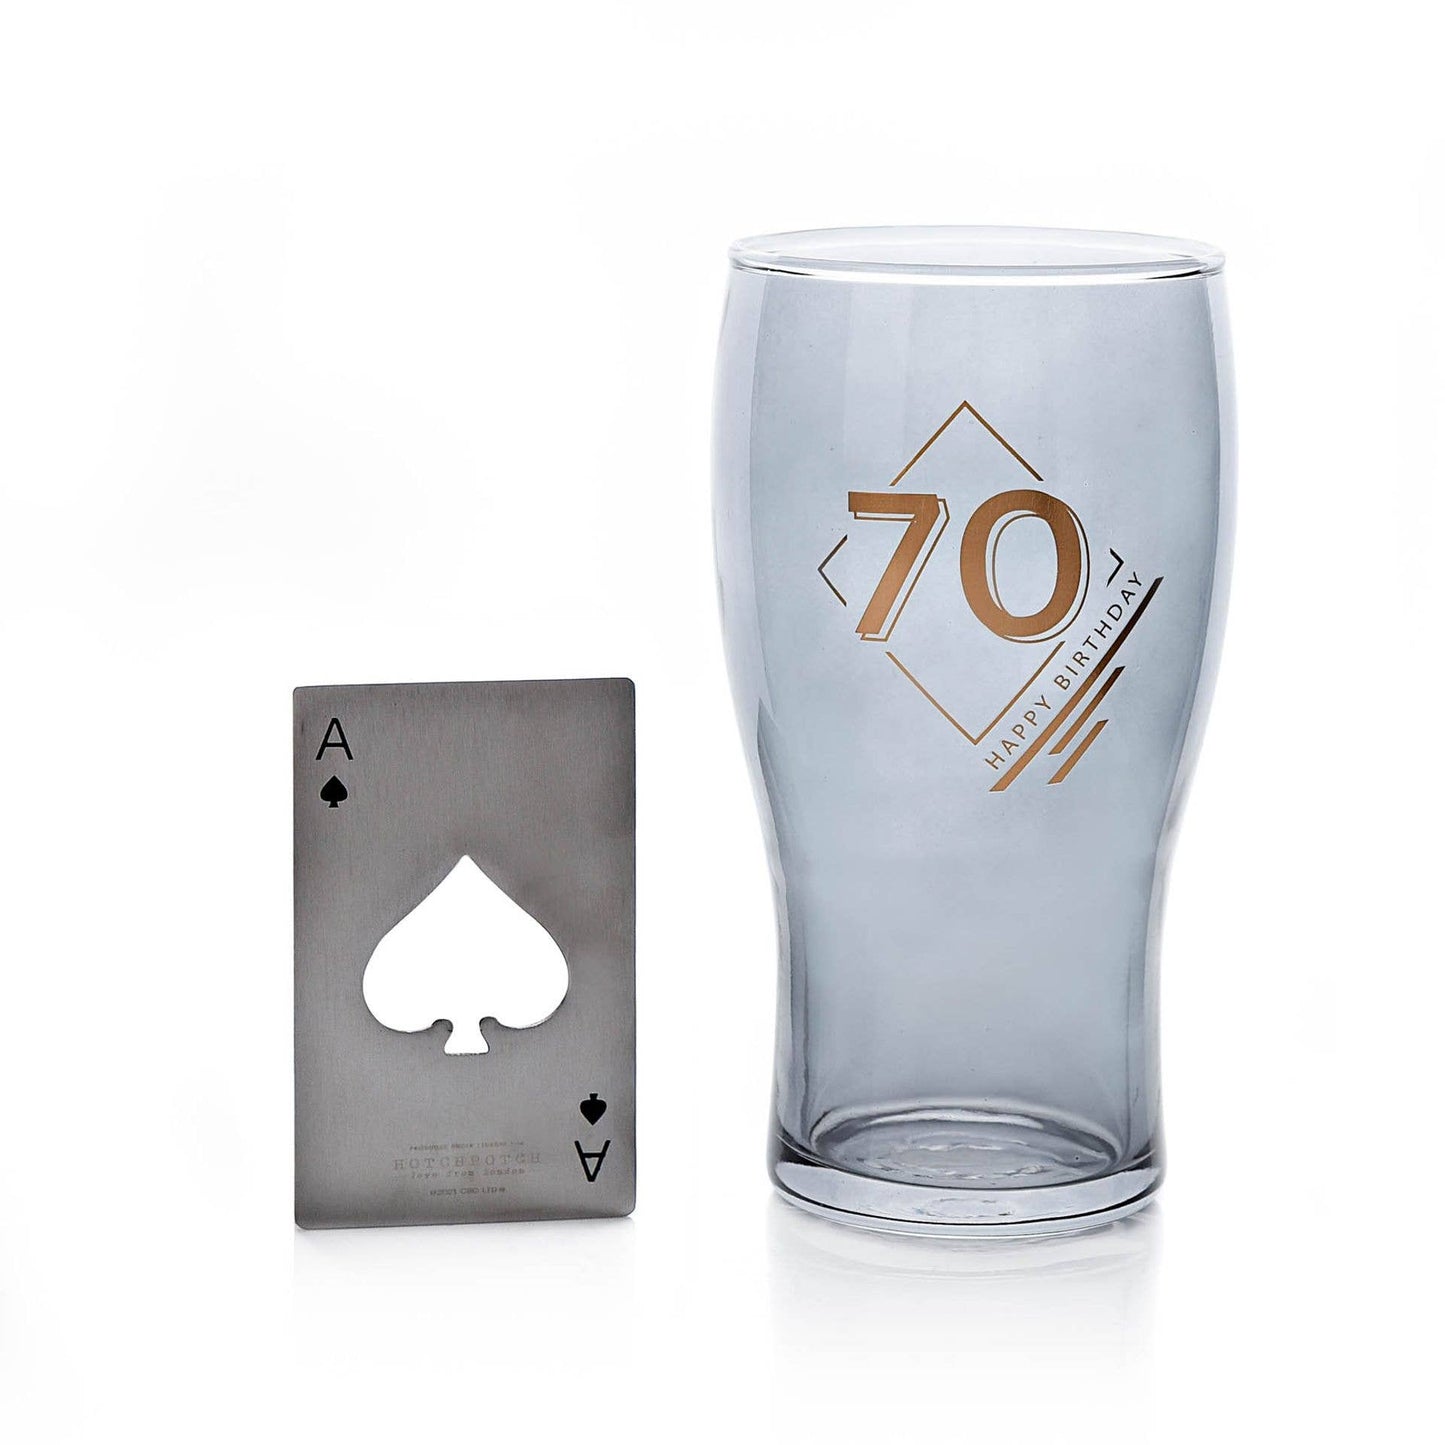 WIDDOP and Co. - Hotchpotch Orion Beer Glass & Bottle Opener - 70